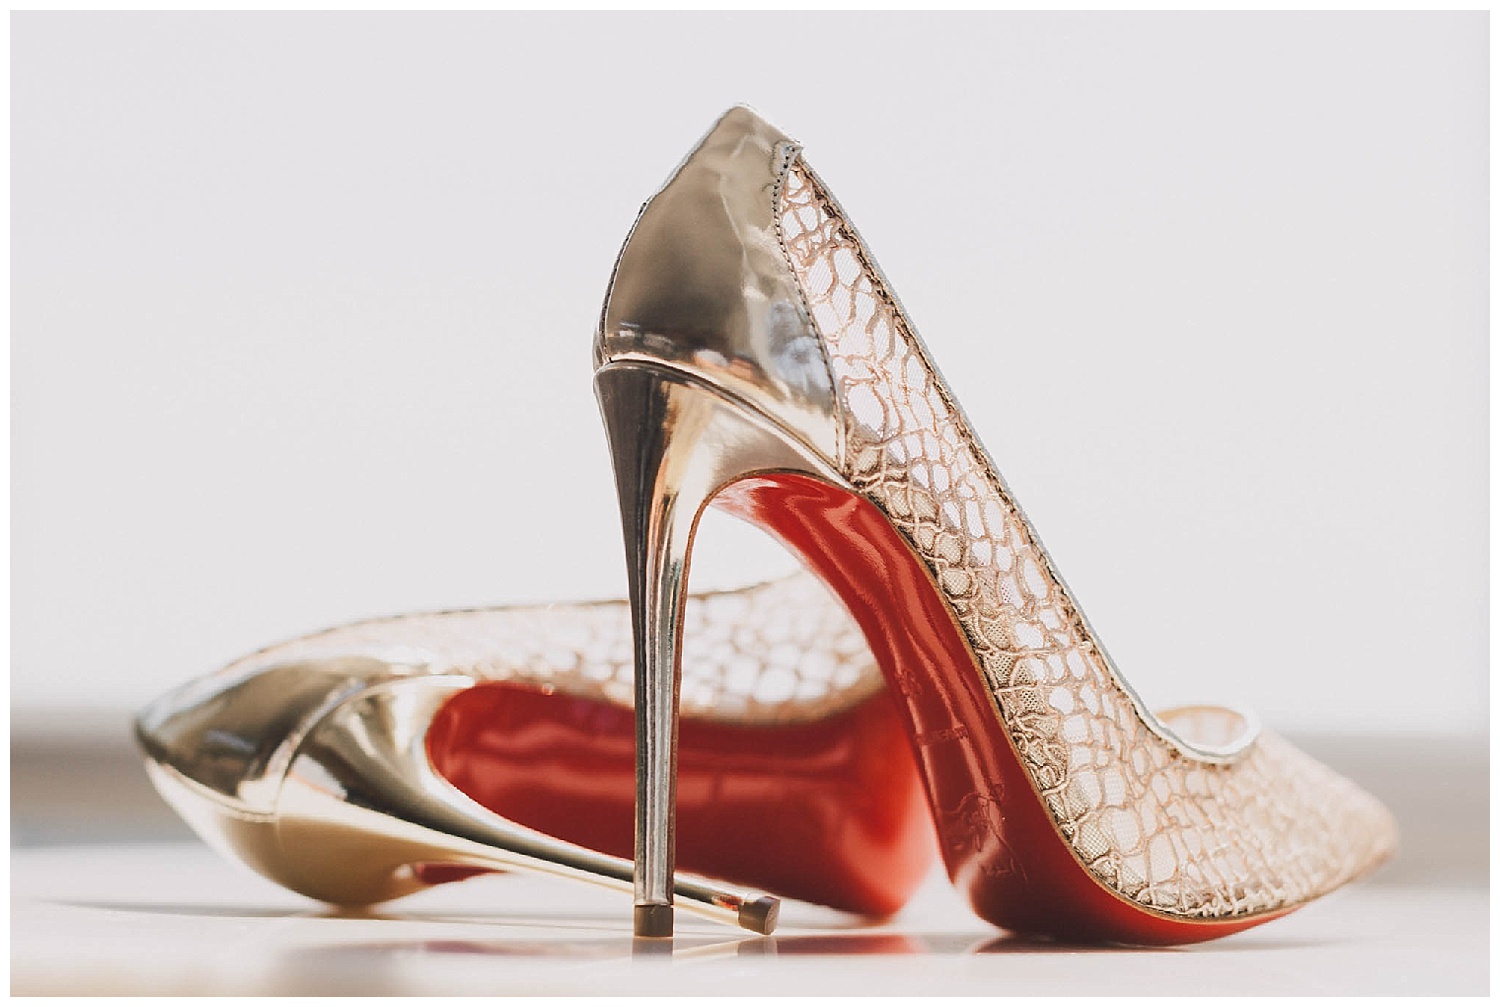 Best louboutin's for your wedding day